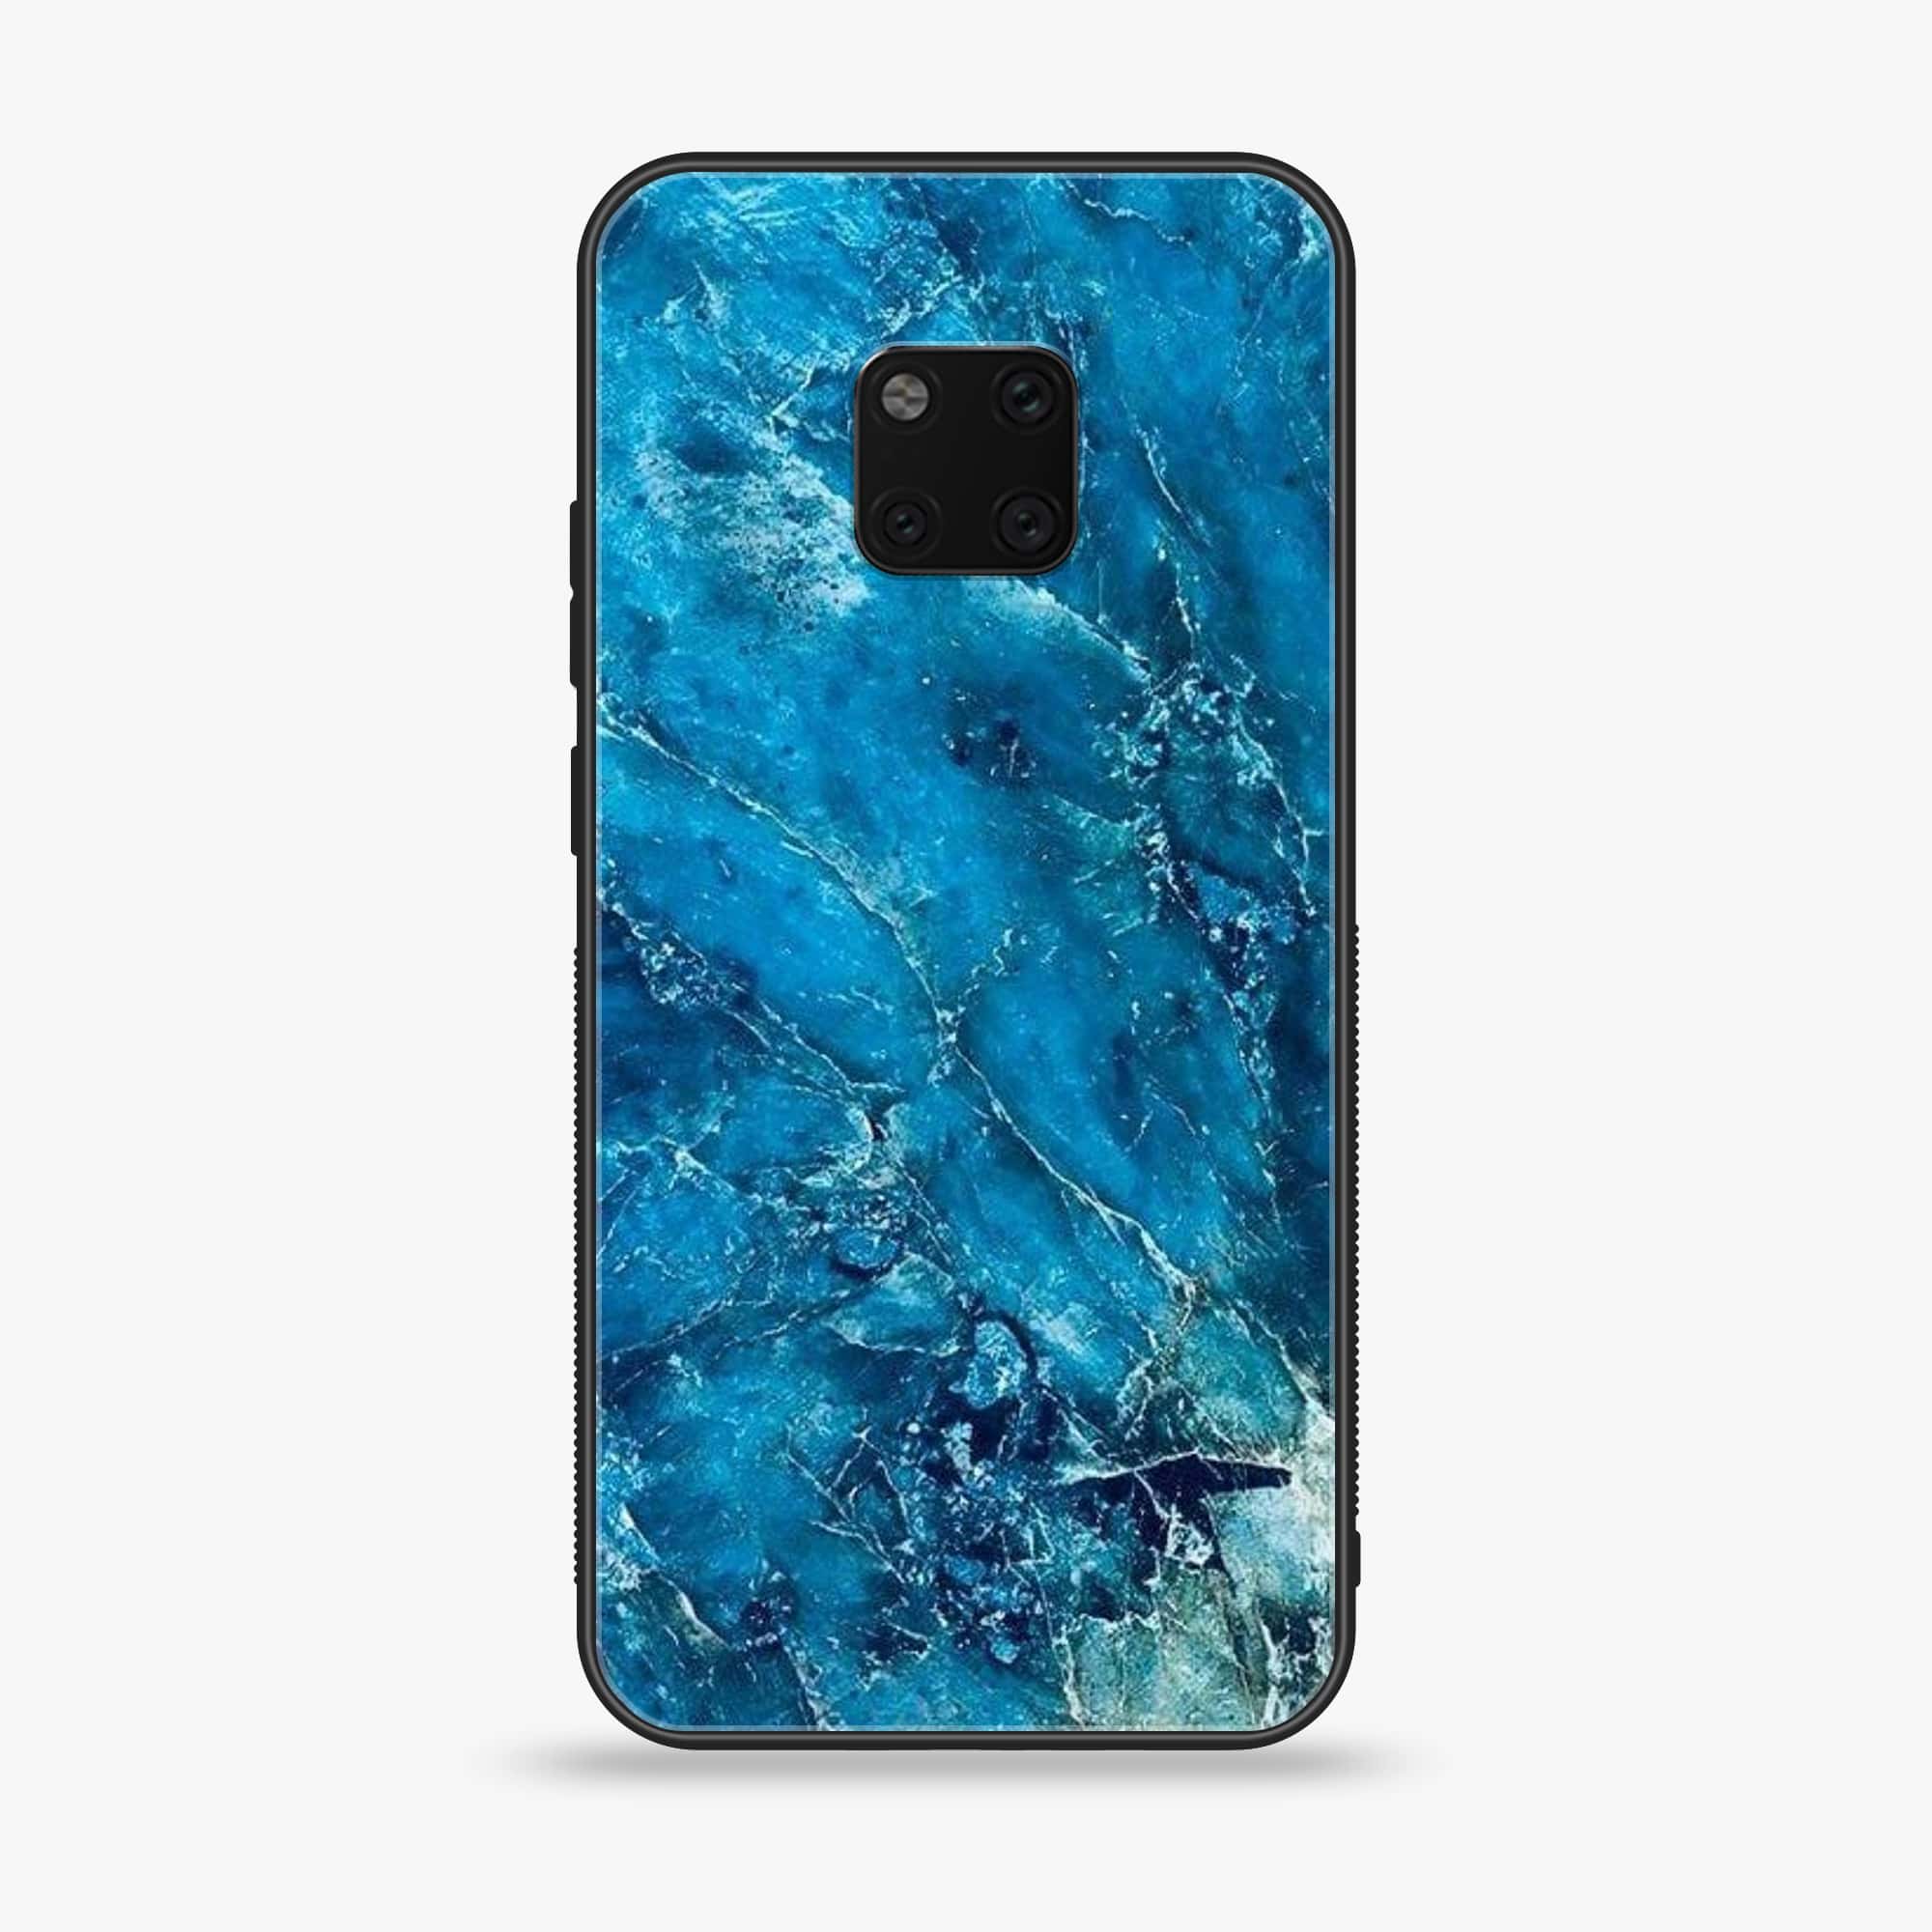 Huawei Mate 20 Pro - Blue Marble Series V 2.0 - Premium Printed Glass soft Bumper shock Proof Case